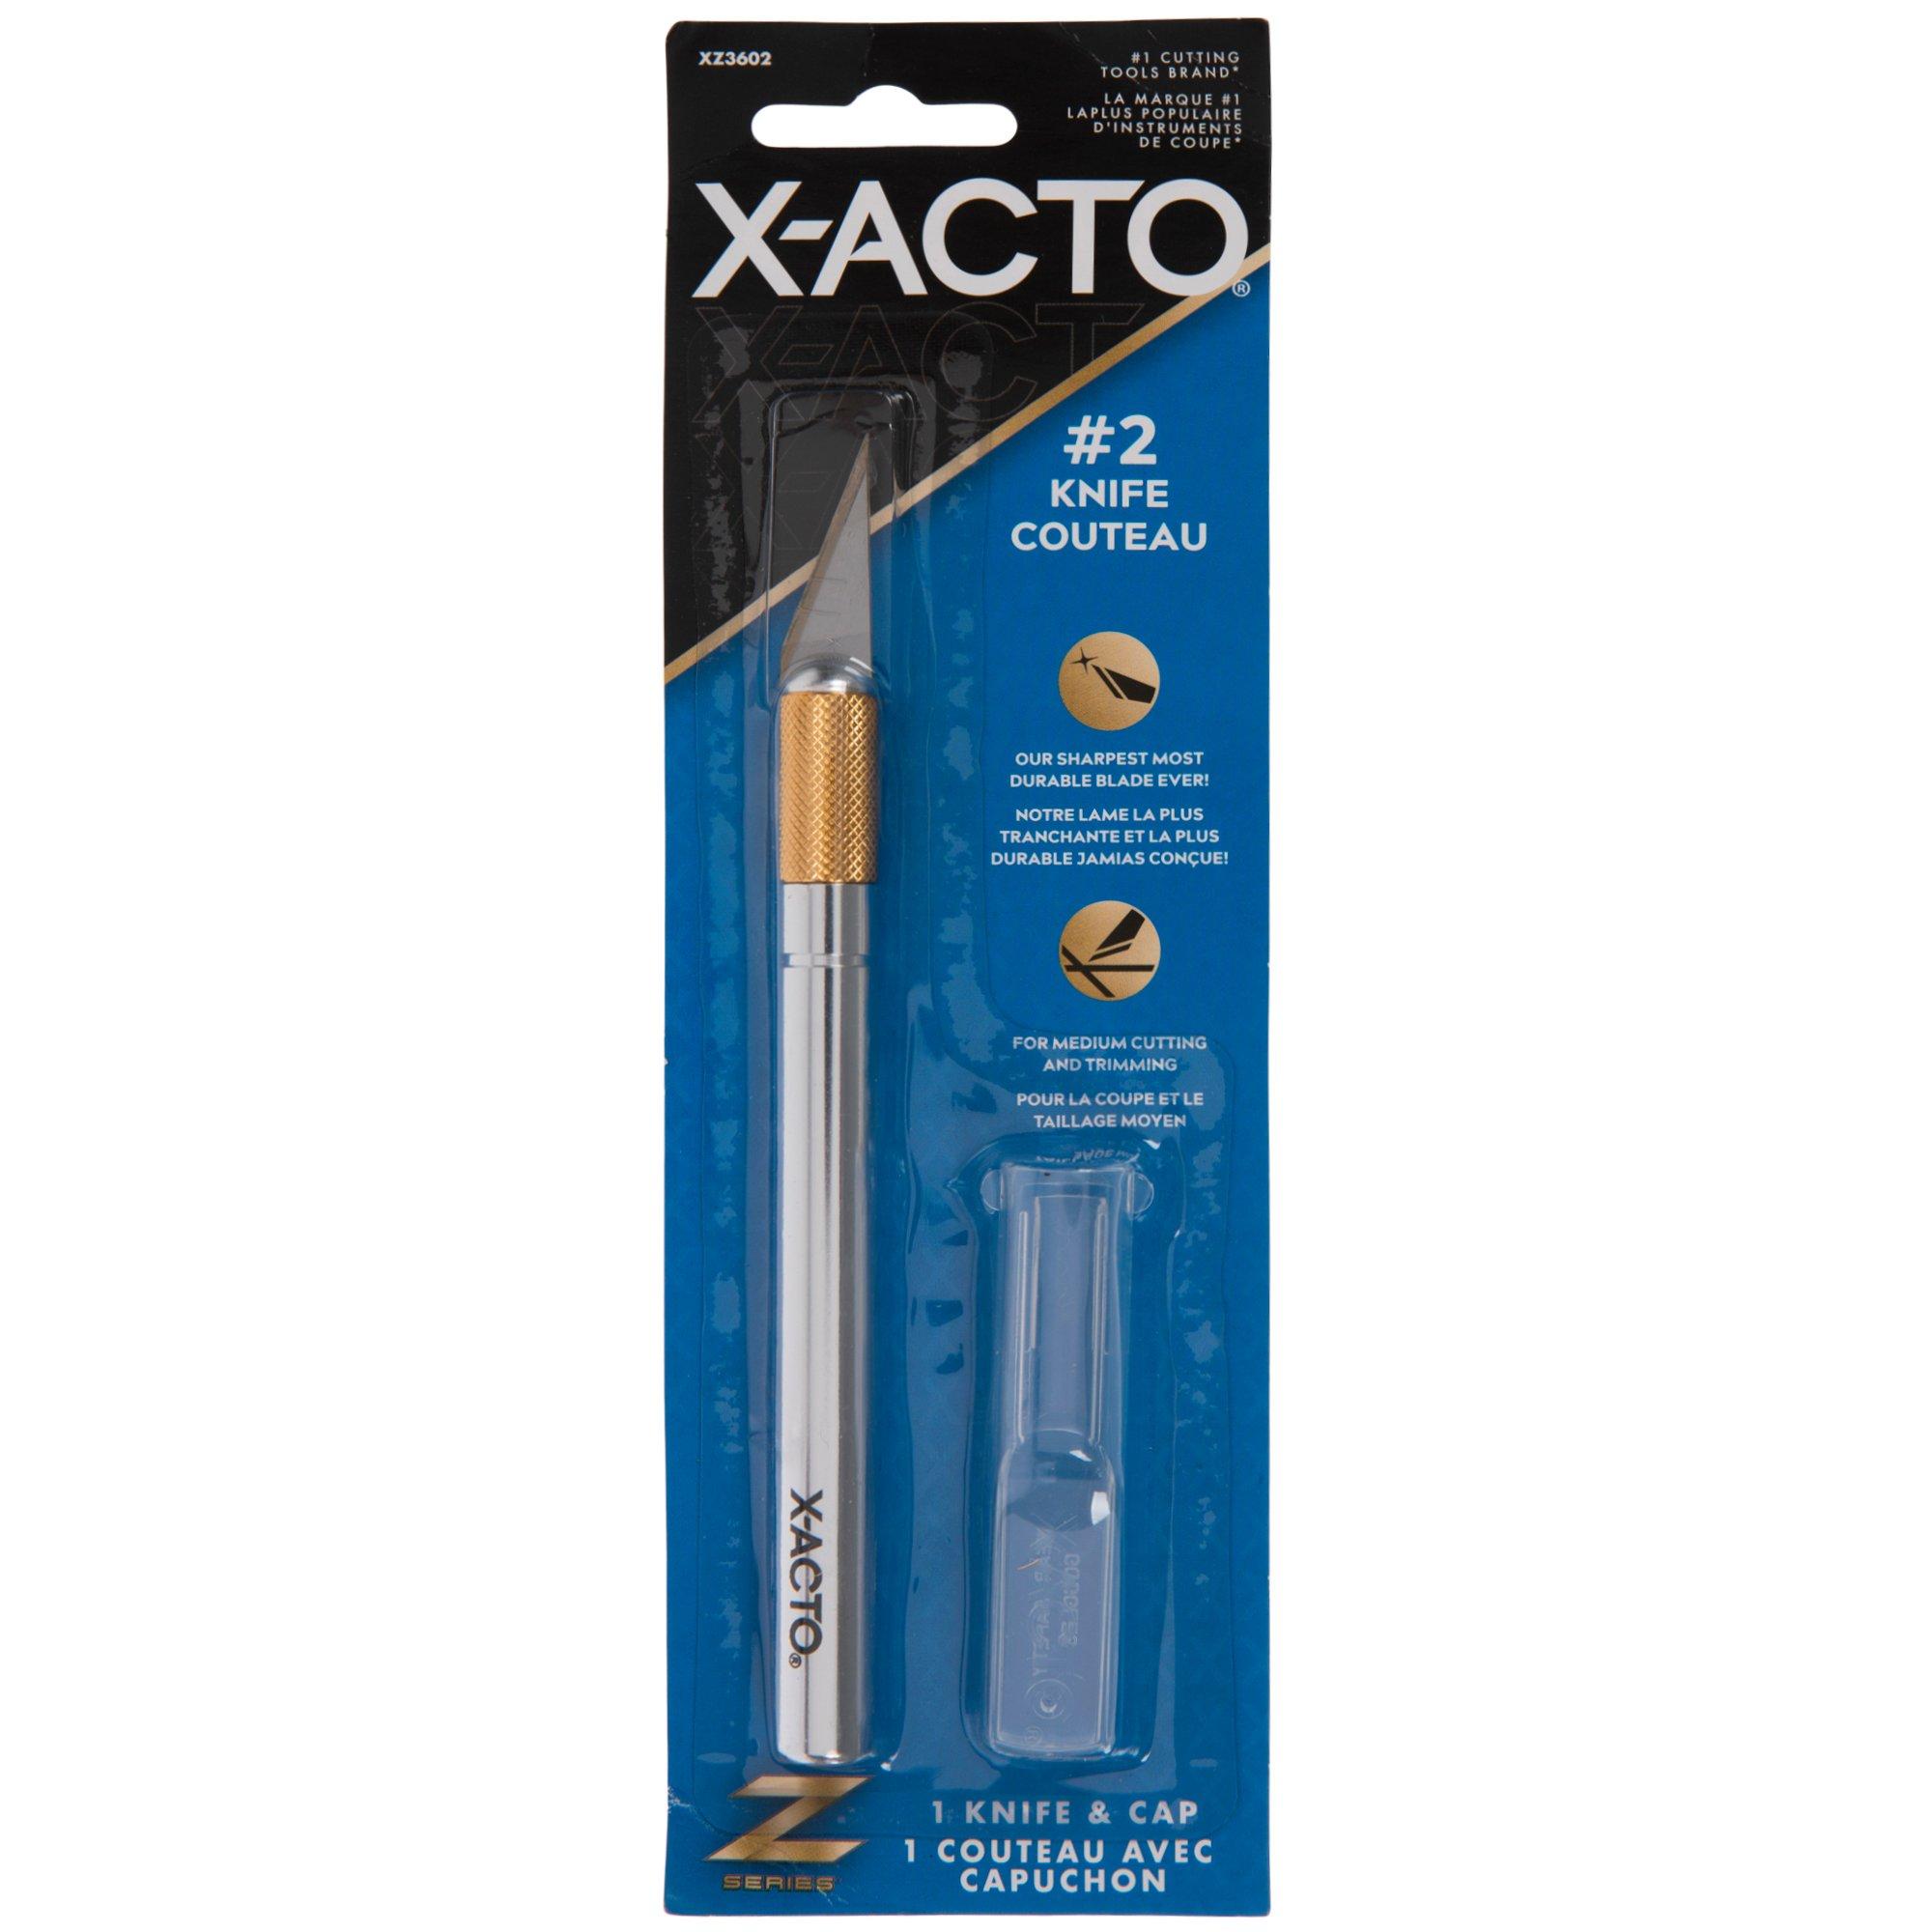 X-Acto Z Series #2 Hobby Knife with Cap - Shop Tools & Equipment at H-E-B